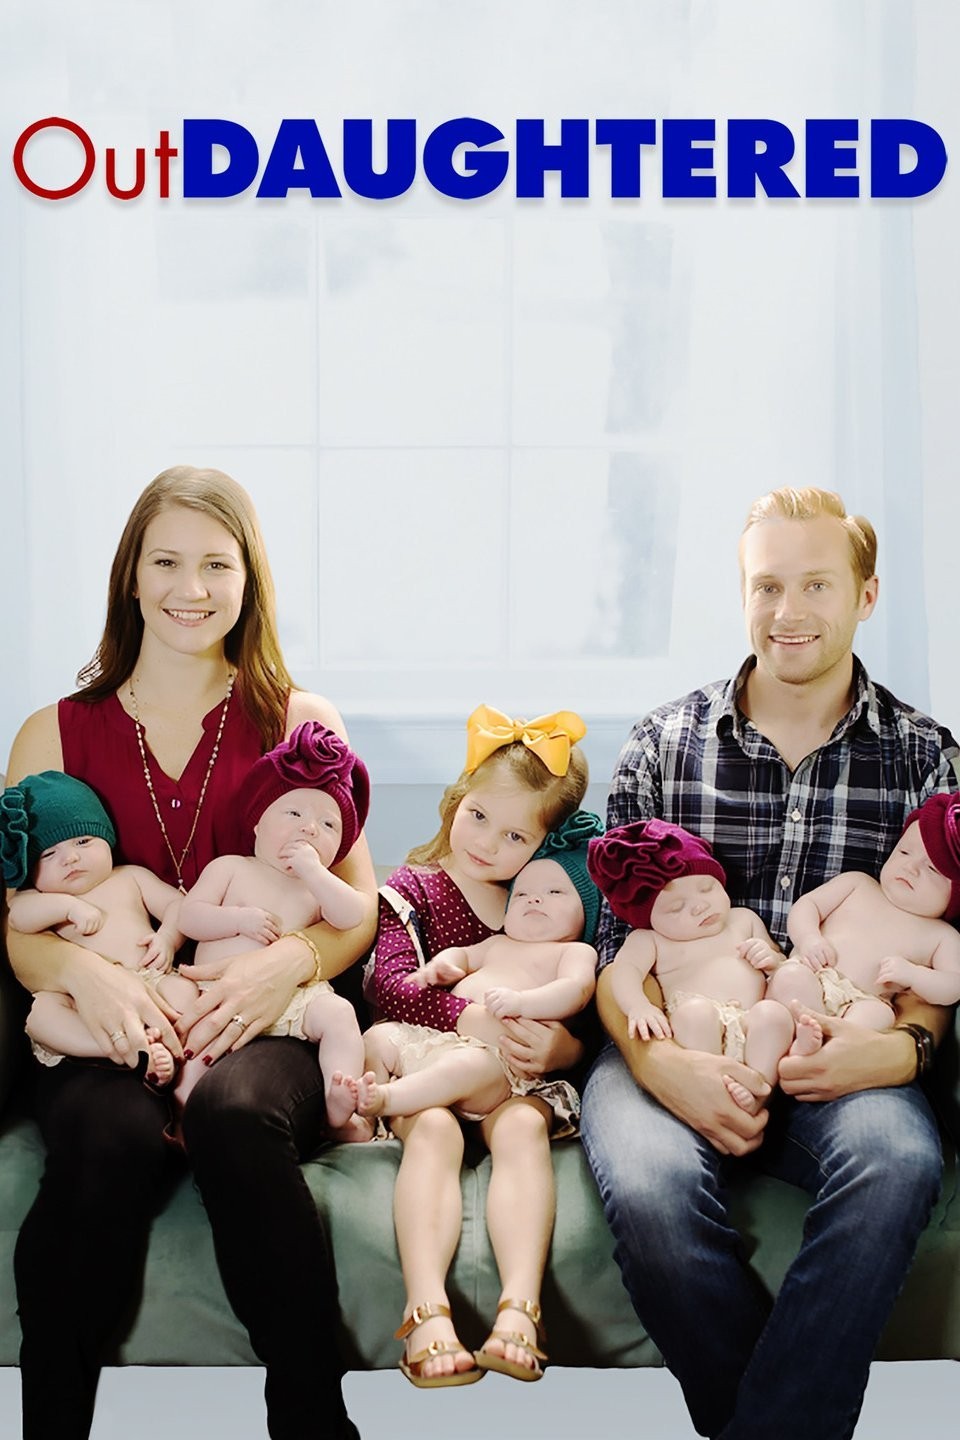 OutDaughtered Supertease: Danielle Busby Faces Possibility of Heart Surgery